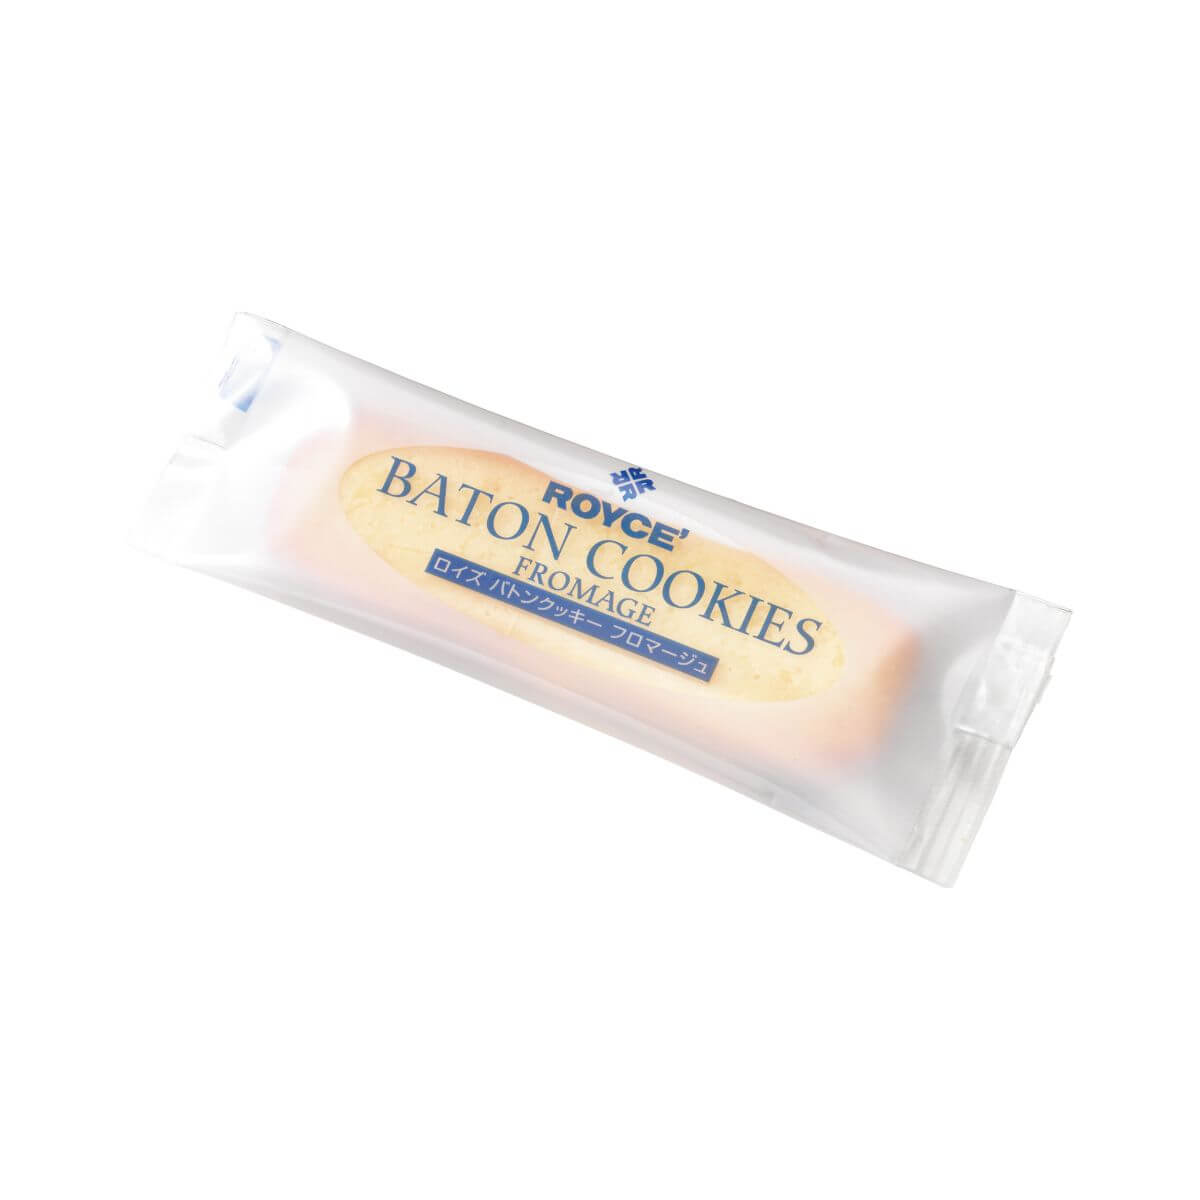 ROYCE' Chocolate - Baton Cookies "Fromage (25 Pcs)" - Image shows a cookie pillow packaging with text saying ROYCE' Baton Cookies Fromage.